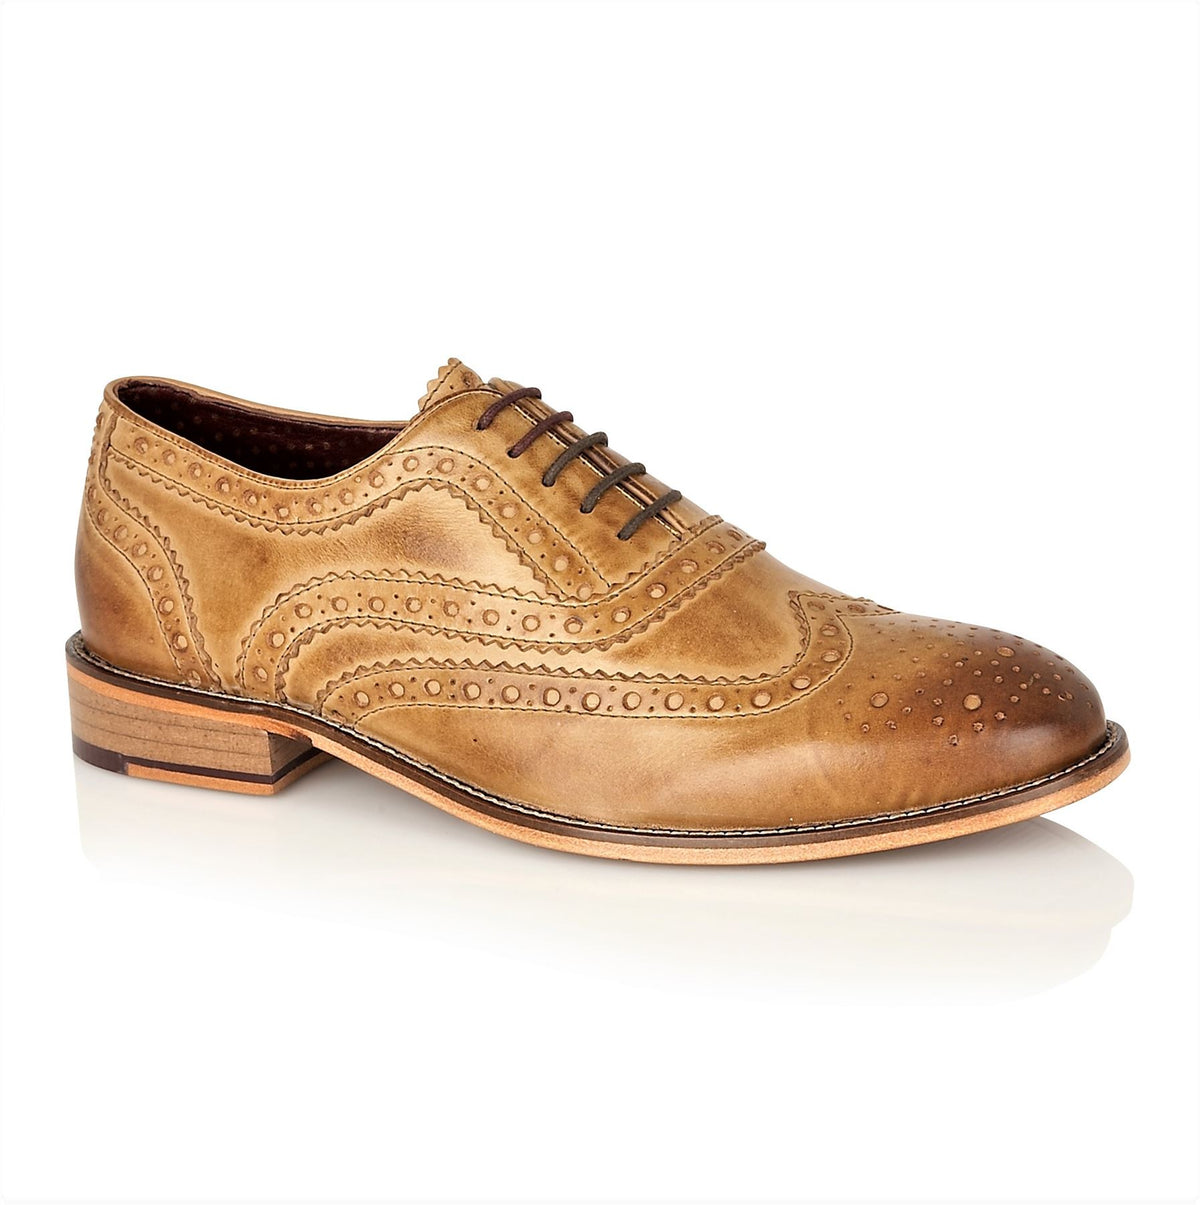 London Brogues Watson Men's Leather Sole Two-Tone Oxford Shoes